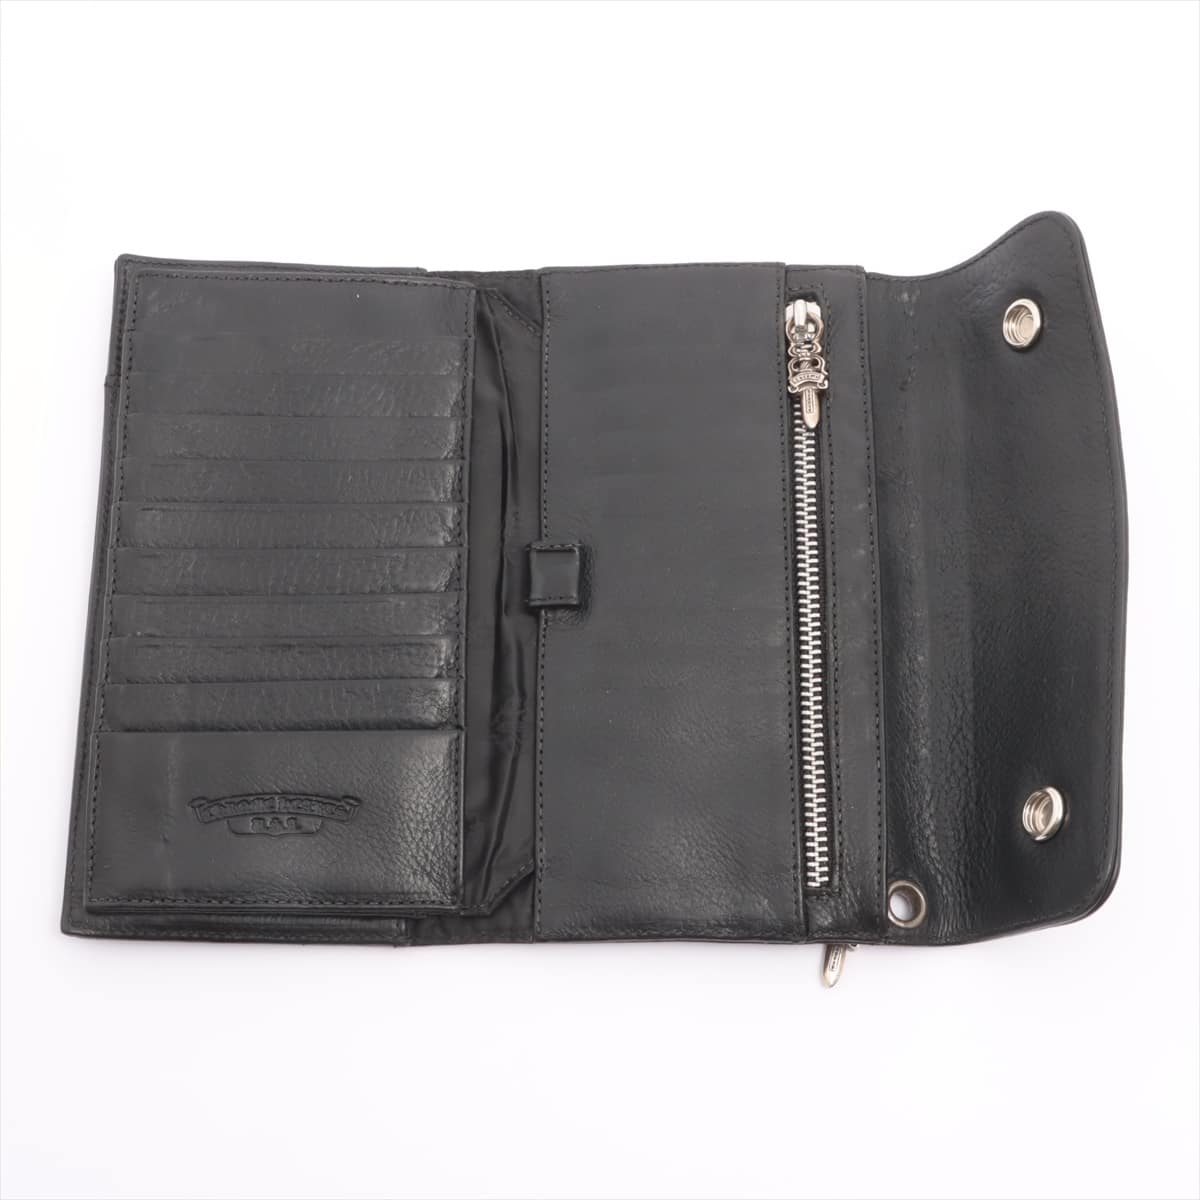 Chrome Hearts Wave Wallet Wallet Leather With invoice Cross button Dagger zip